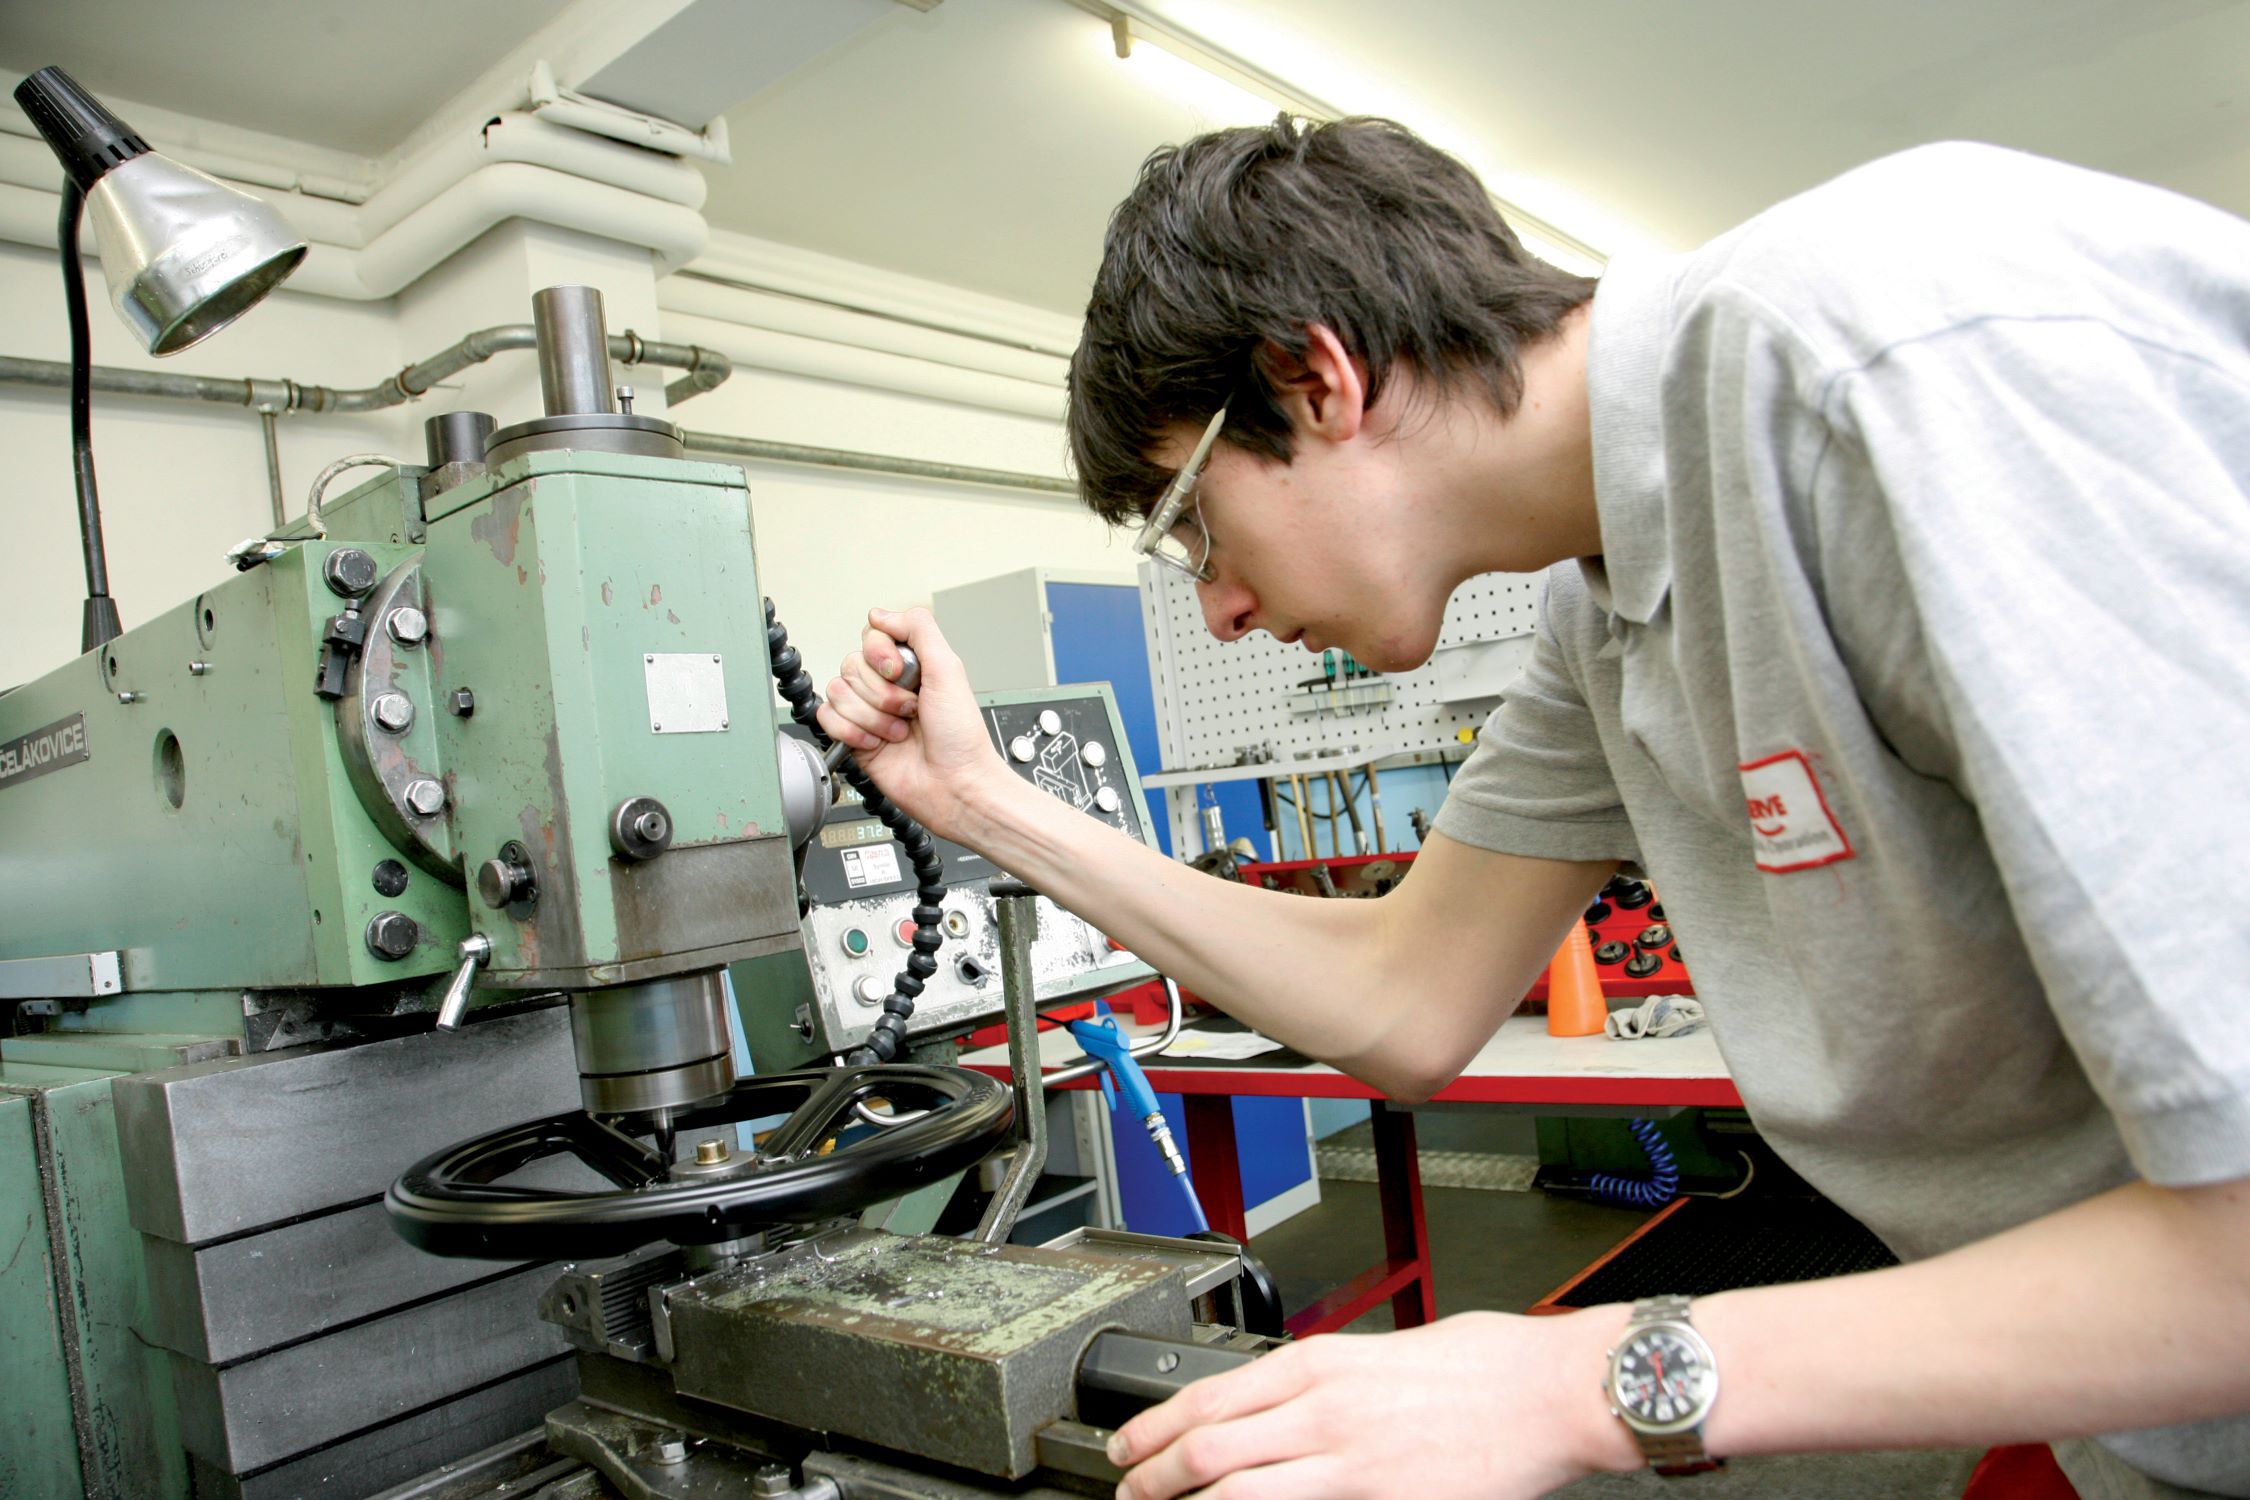 Apprentice of mechatronics in the training lab of Flowserve